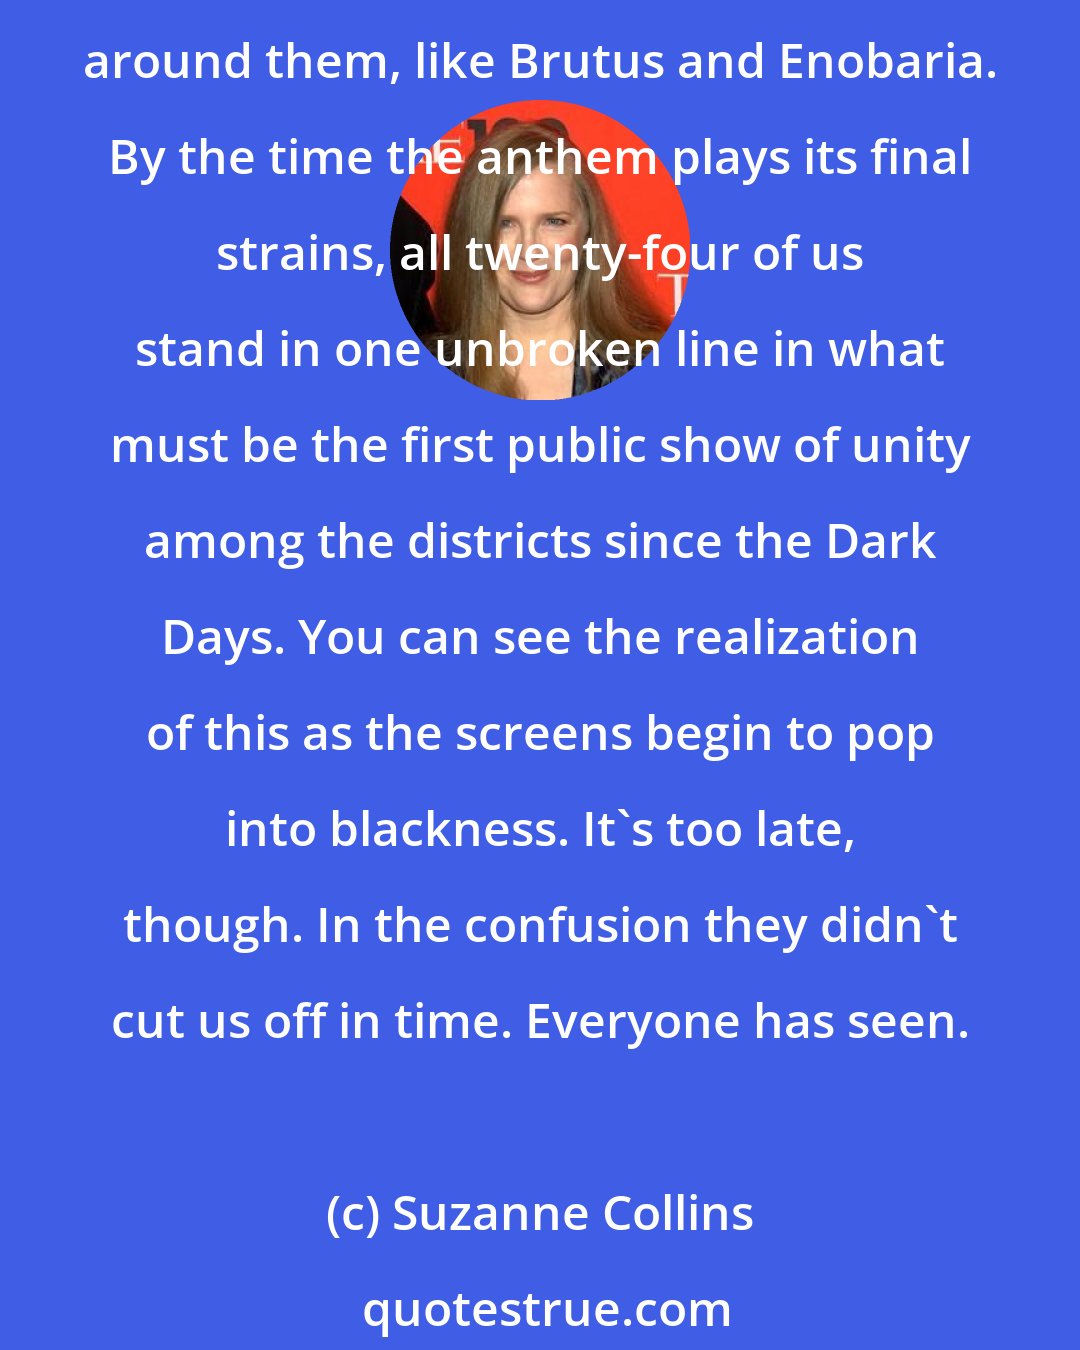 Suzanne Collins: And then it happens. Up and down the row, the victors begin to join hands. Some right away, like the morphlings, or Wiress and Beetee. Others unsure but caught up in the demands of those around them, like Brutus and Enobaria. By the time the anthem plays its final strains, all twenty-four of us stand in one unbroken line in what must be the first public show of unity among the districts since the Dark Days. You can see the realization of this as the screens begin to pop into blackness. It's too late, though. In the confusion they didn't cut us off in time. Everyone has seen.